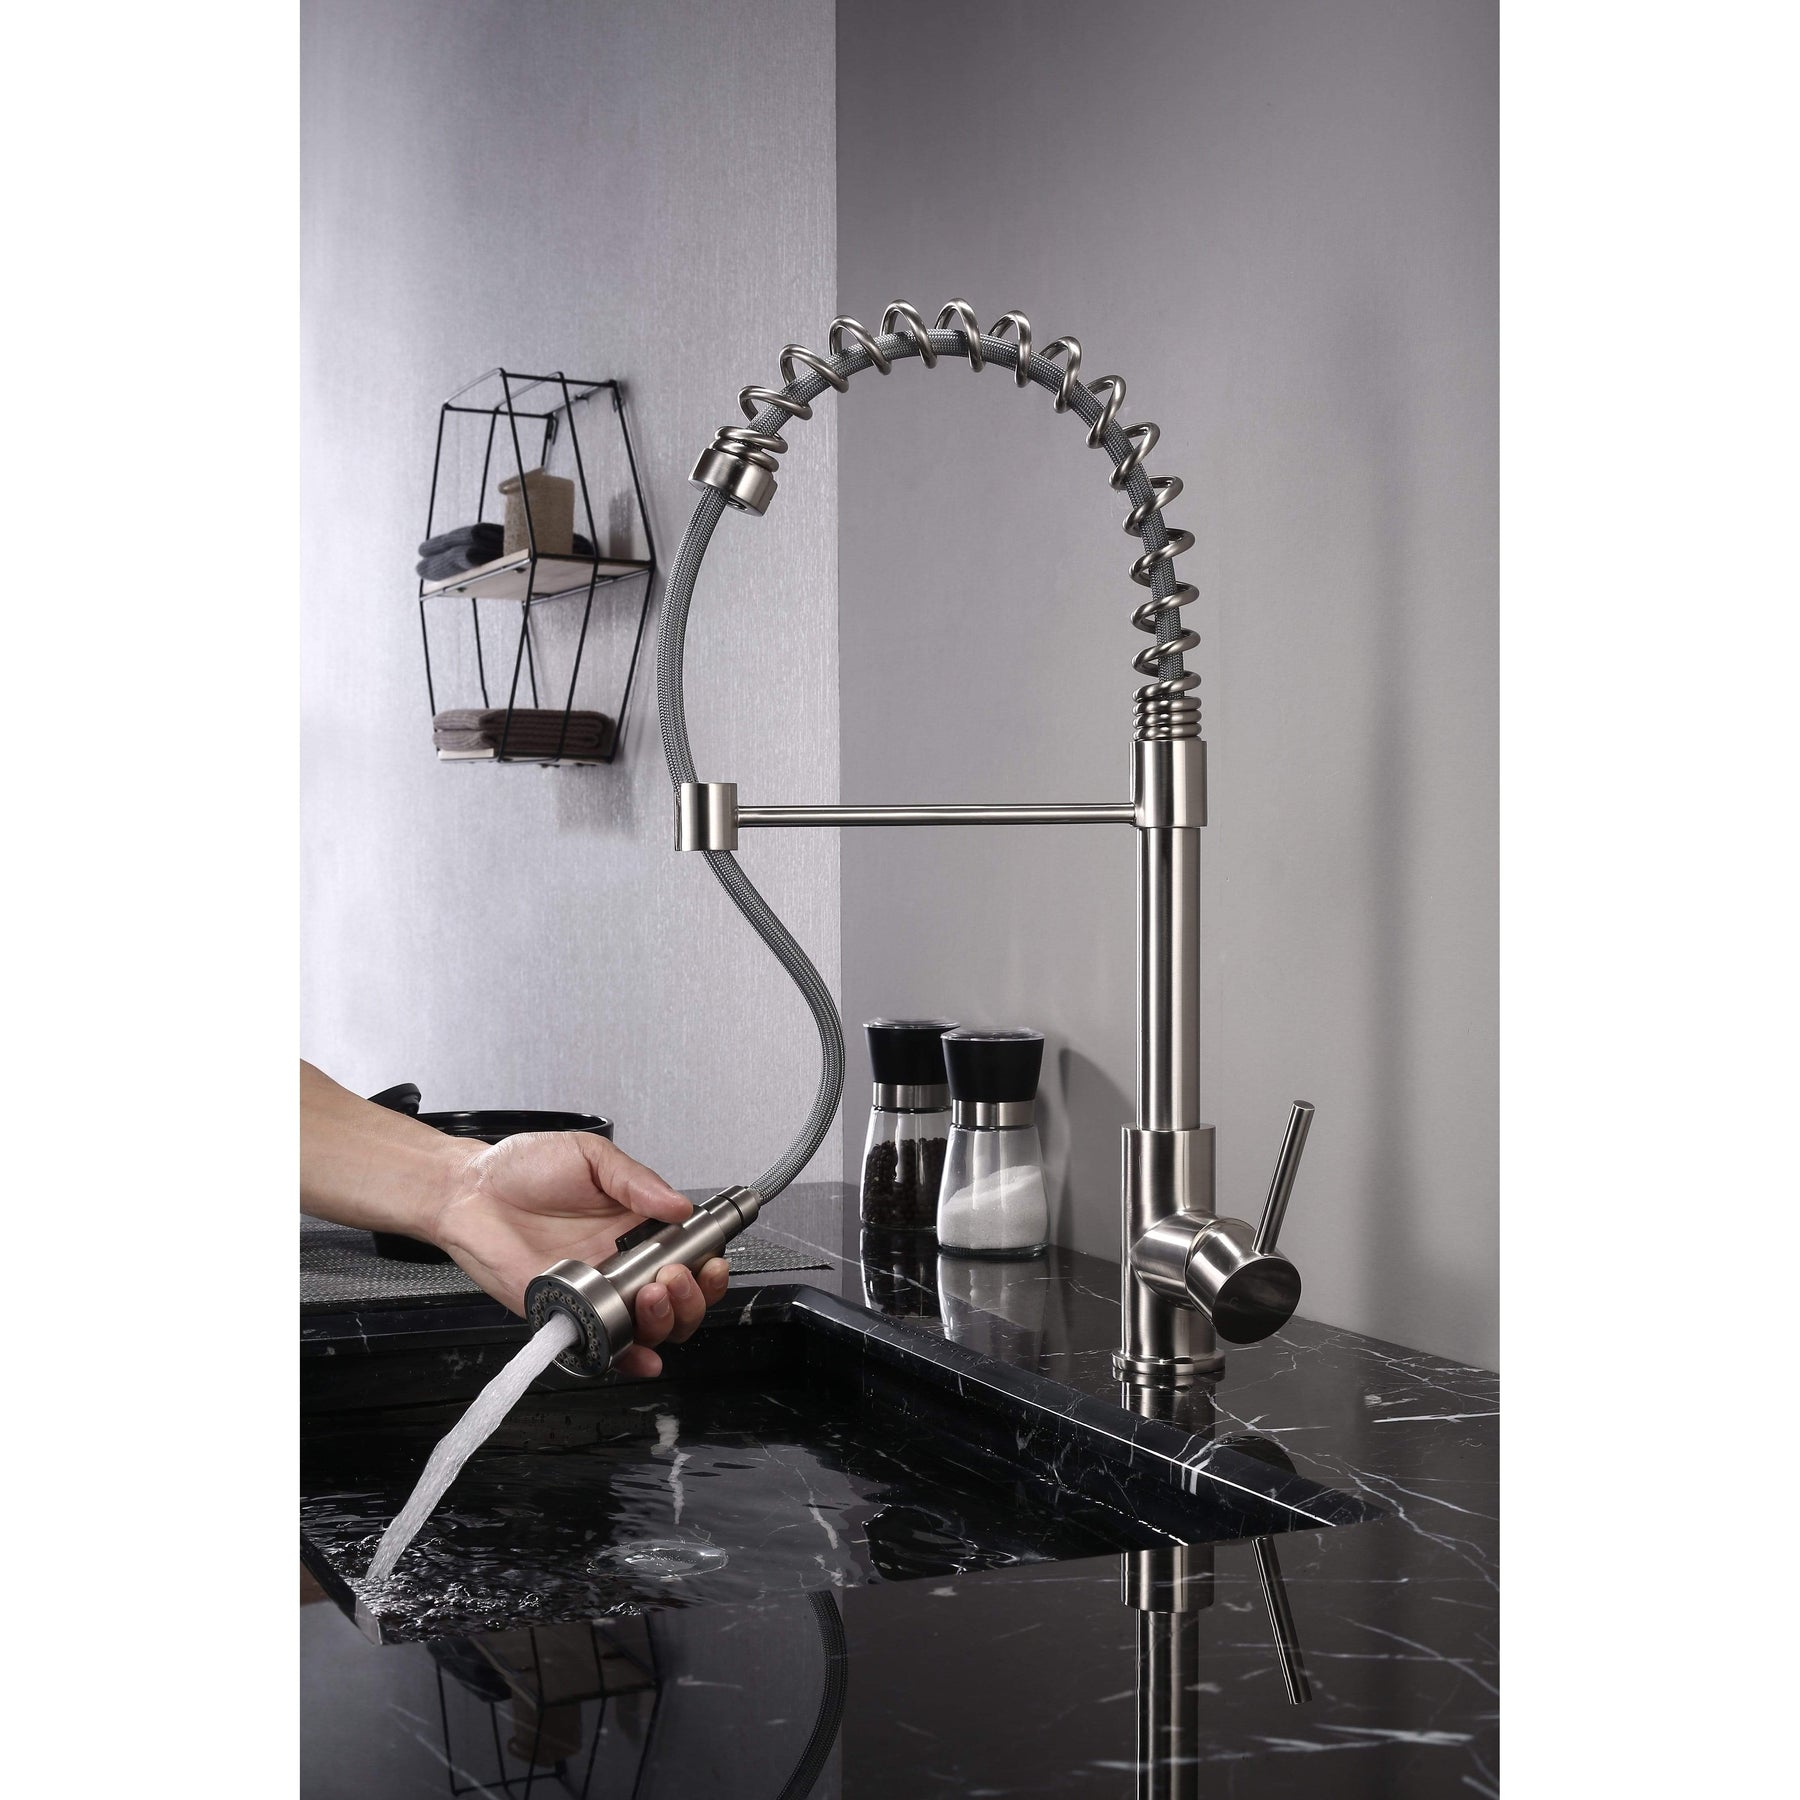 Newport Brass Kitchen Faucet with Pull Out Sprayer